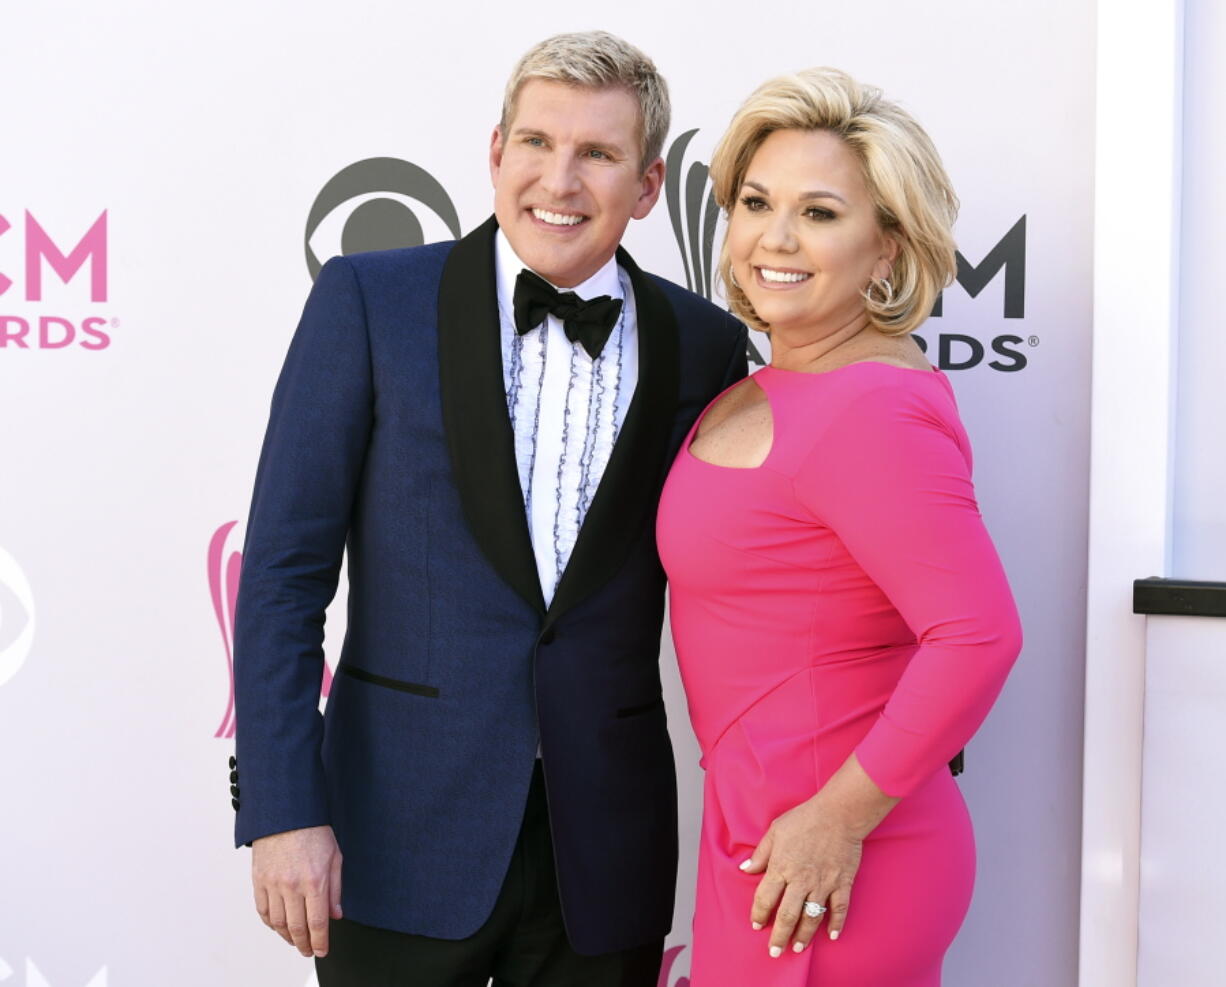 FILE - Todd Chrisley, left, and his wife, Julie Chrisley, pose for photos at the 52nd annual Academy of Country Music Awards on April 2, 2017, in Las Vegas. The couple, stars of the reality television show "Chrisley Knows Best," have been found guilty in Atlanta on federal charges including bank fraud and tax evasion Tuesday, June 7, 2022.